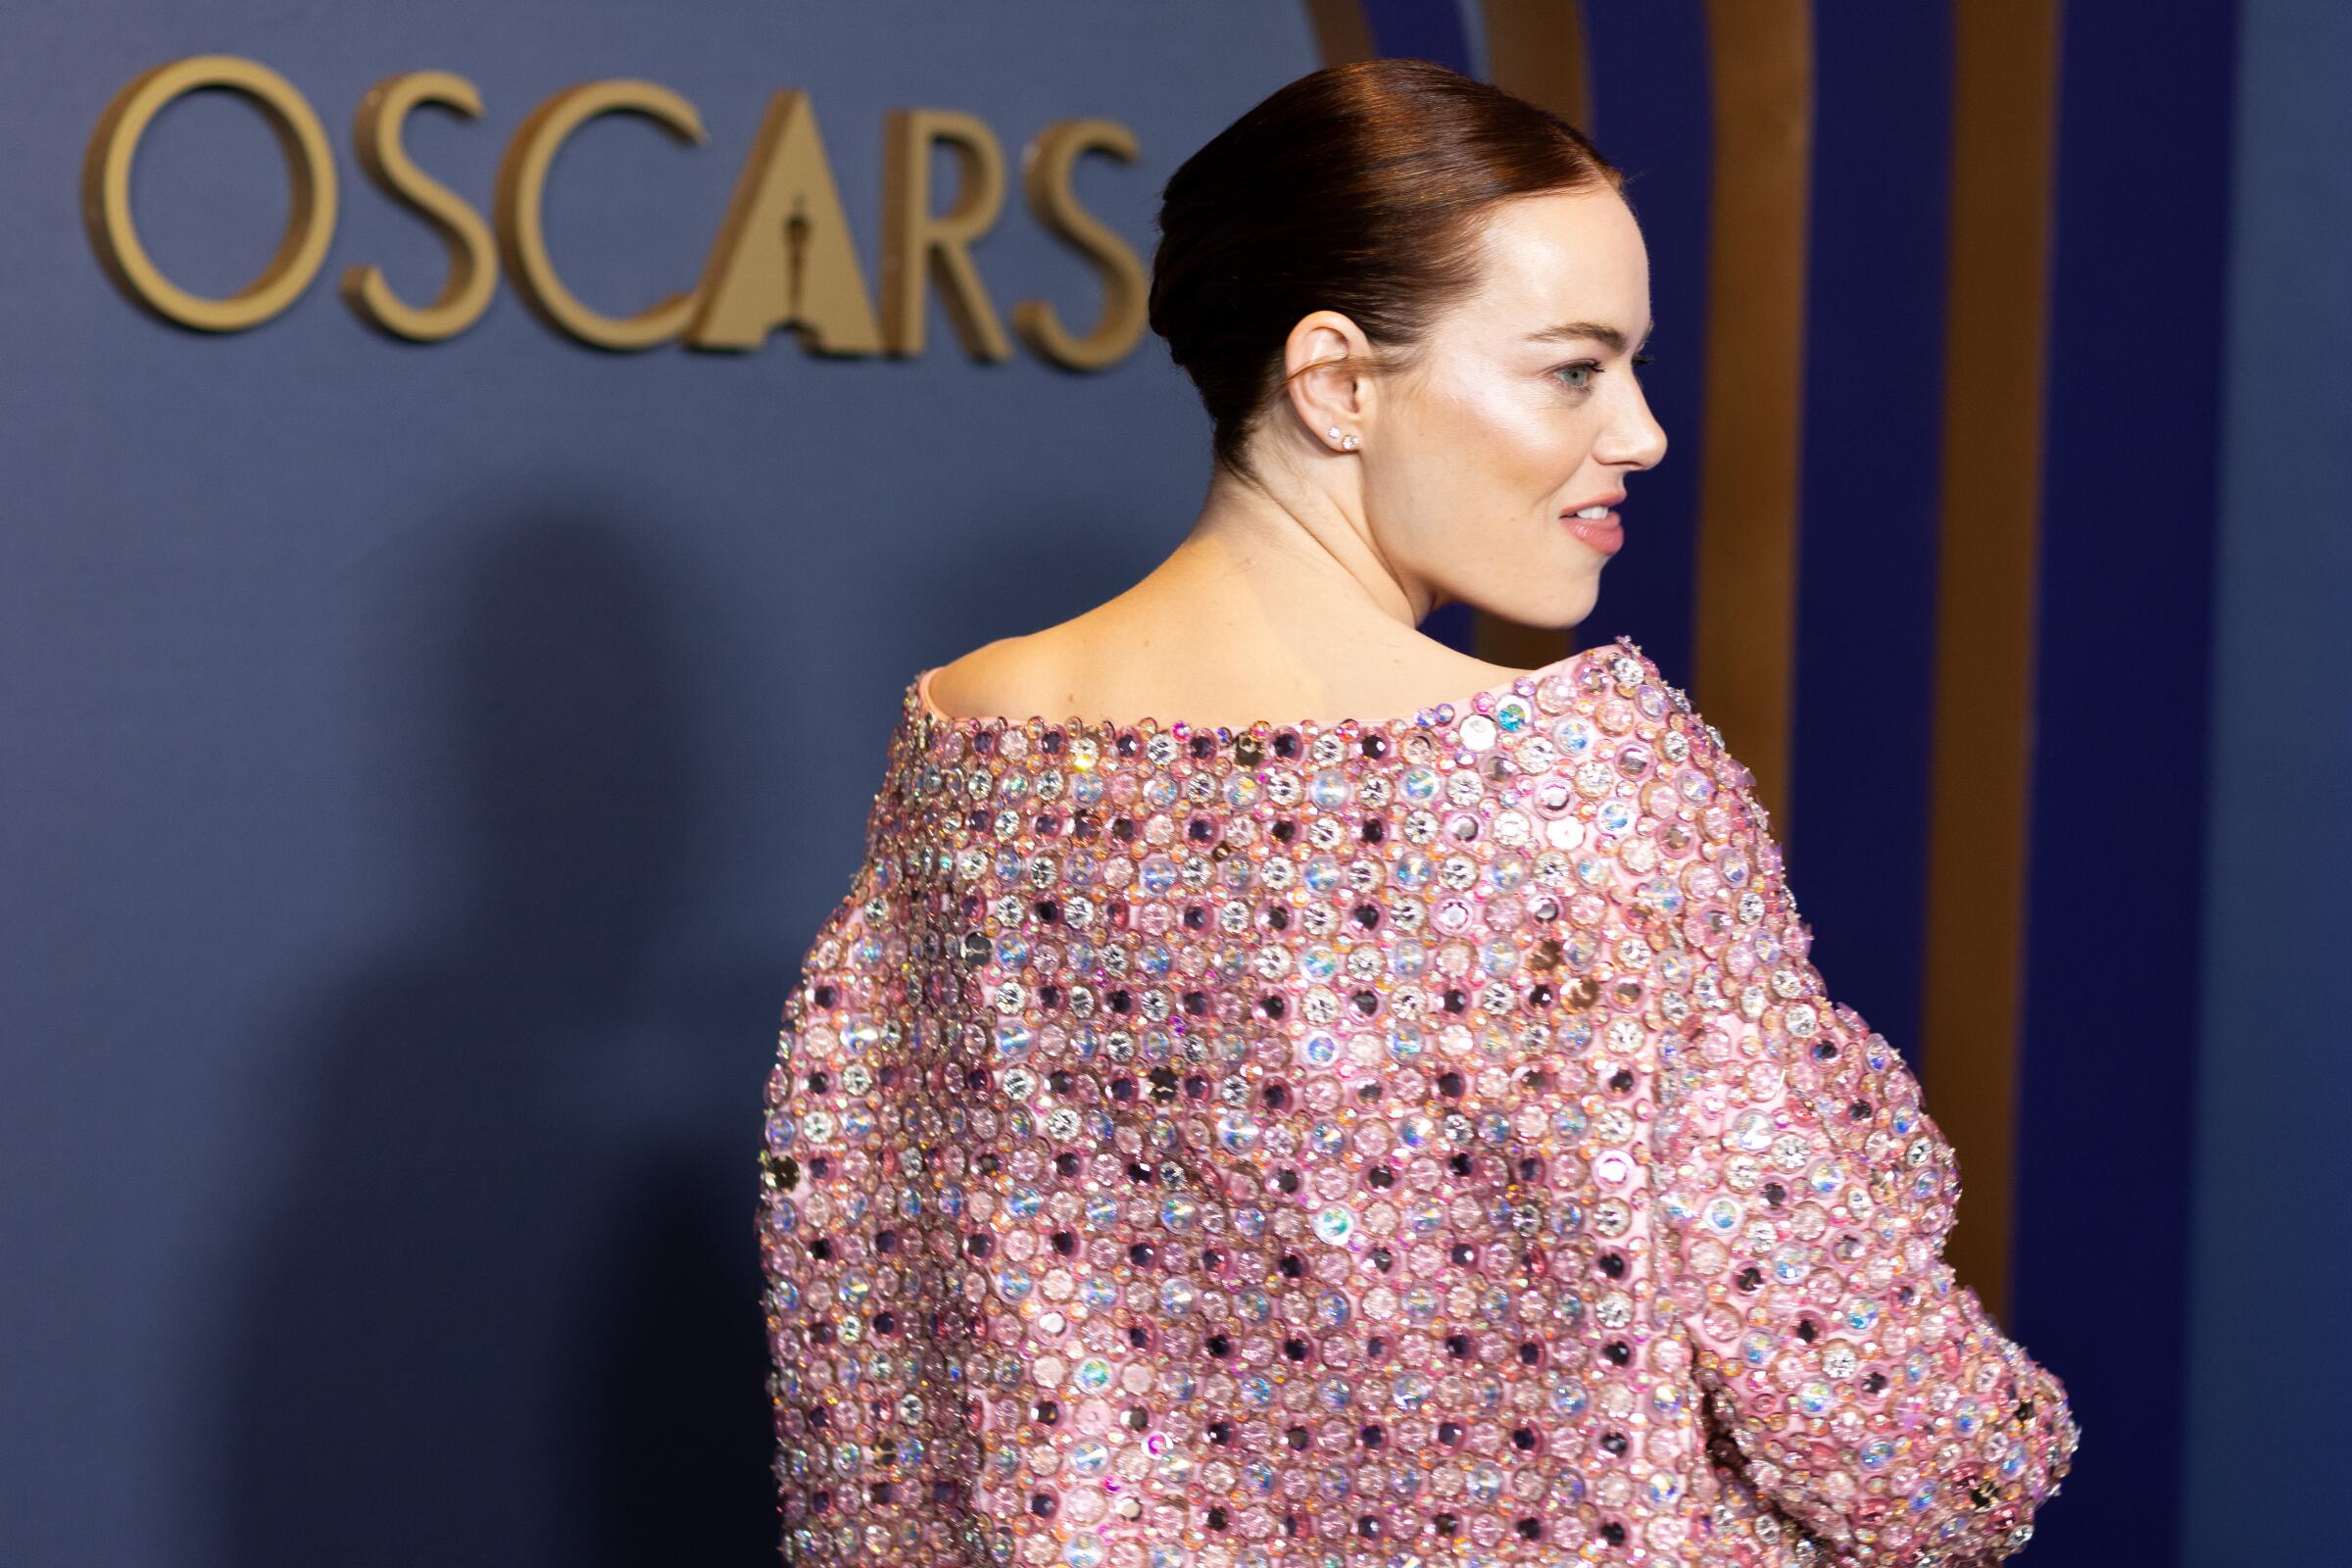 Emma Stone at the recent Governors Awards wears a sparkly pink outfit.